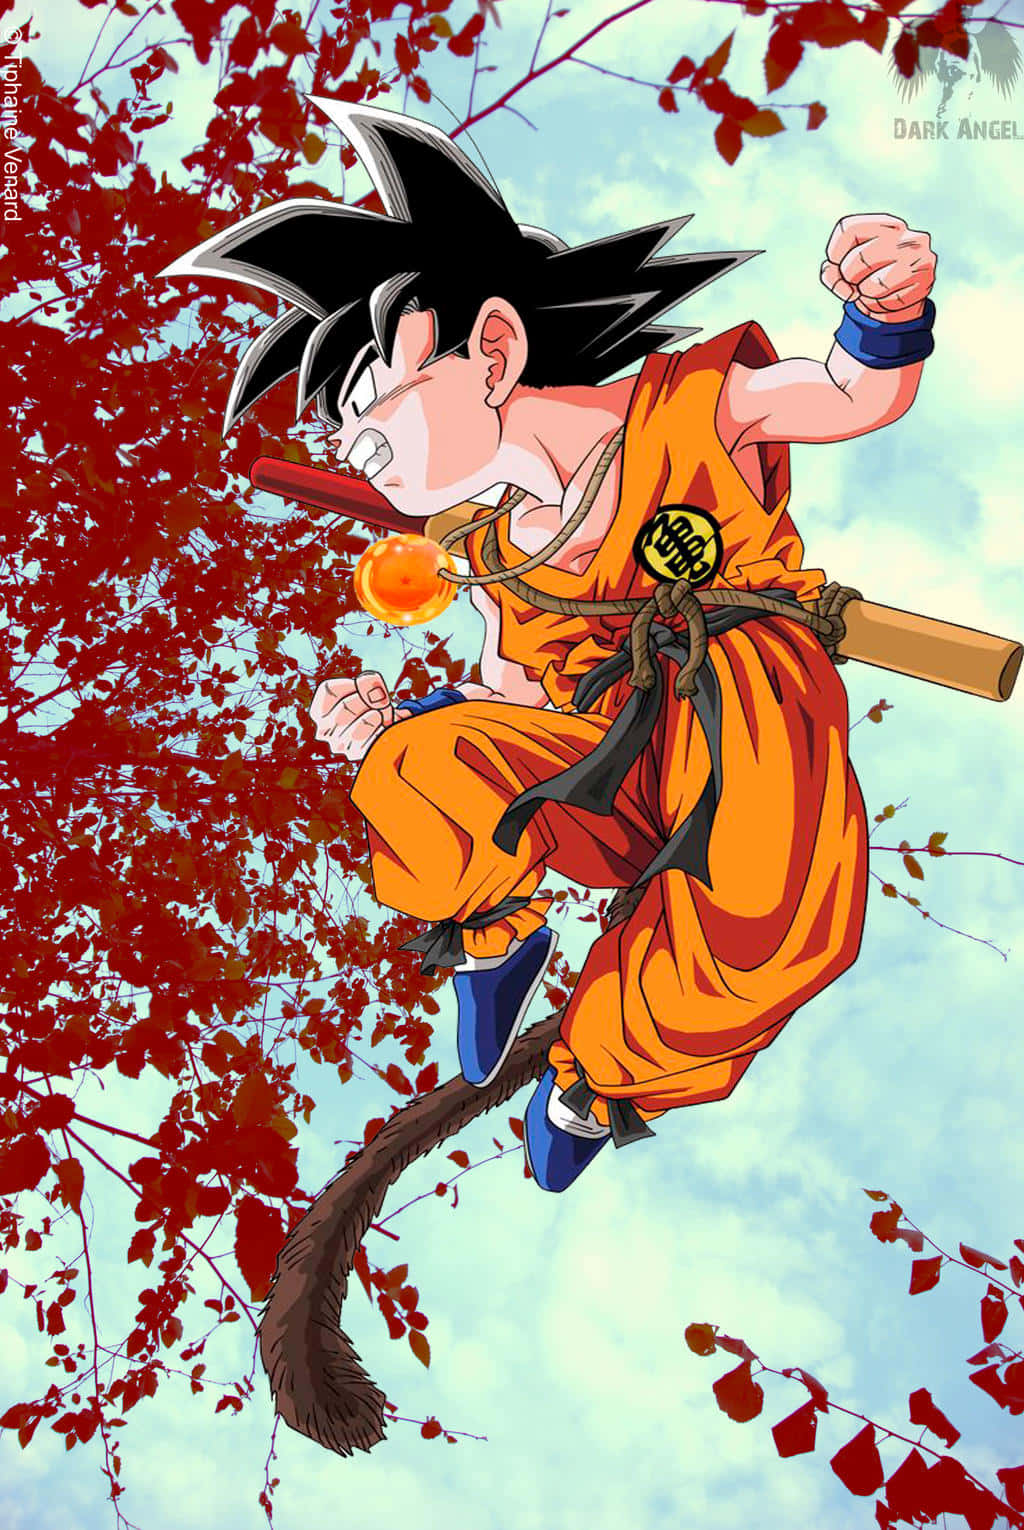 A youthful Goku ready to take on new adventures. Wallpaper